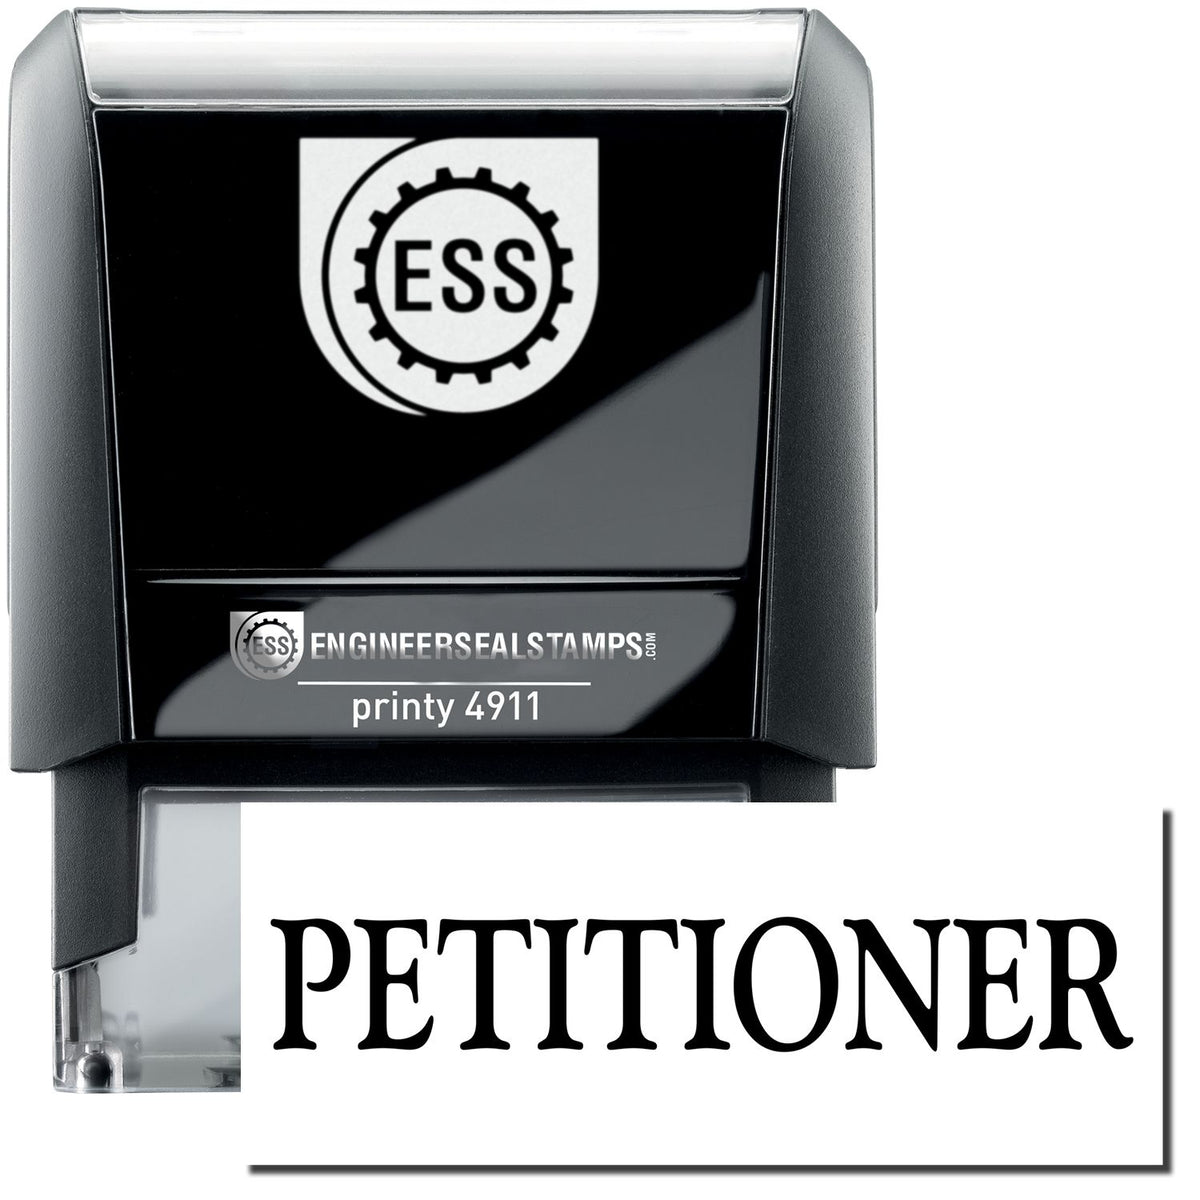 A self-inking stamp with a stamped image showing how the text &quot;PETITIONER&quot; is displayed after stamping.